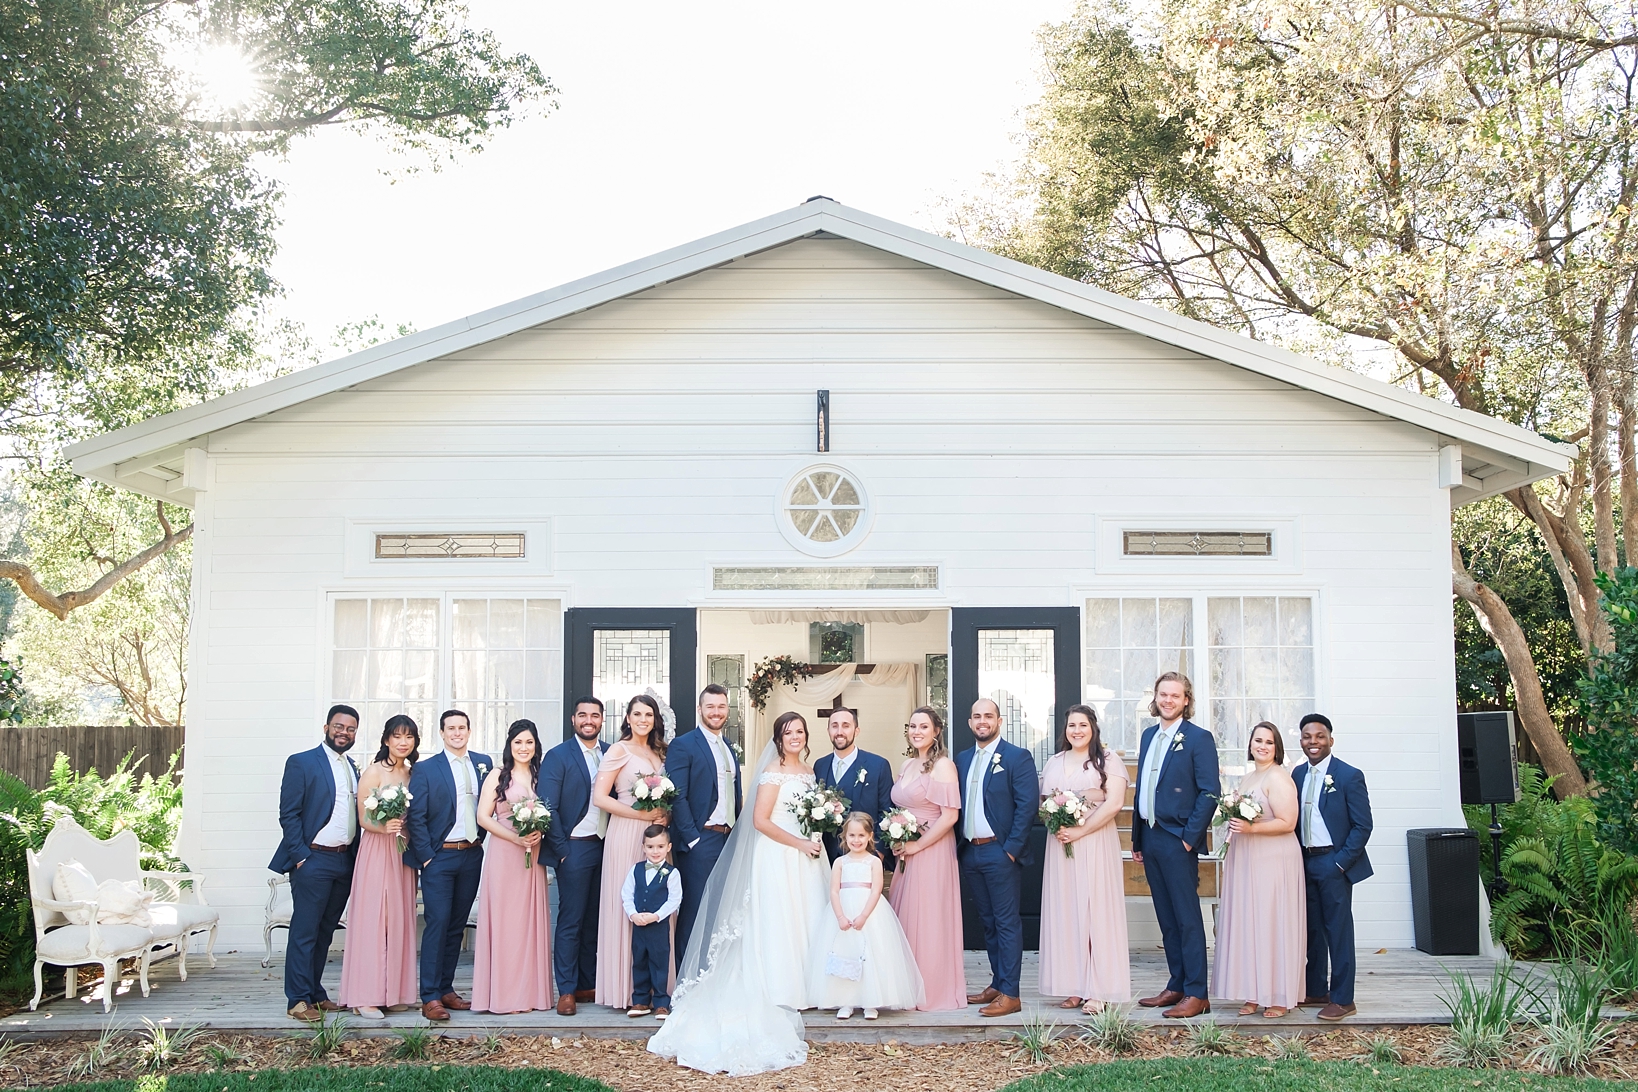 The entire wedding party poses for a formal portrait on the grounds of Cross Creek Ranch